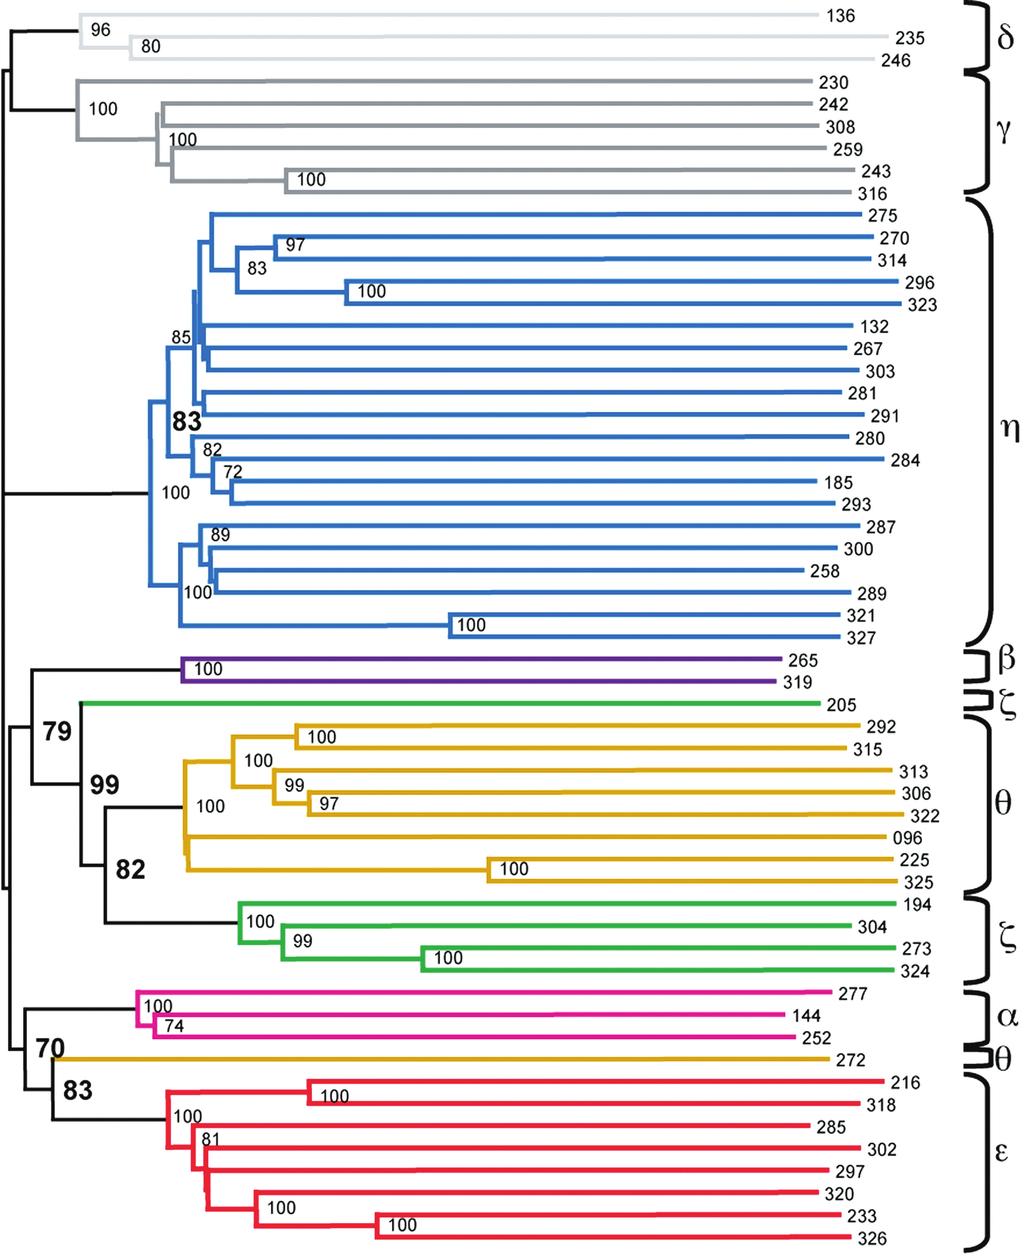 BEIKO ET AL. LGT AND GENOME PHYLOGENY 851 2008 FIGURE 5.